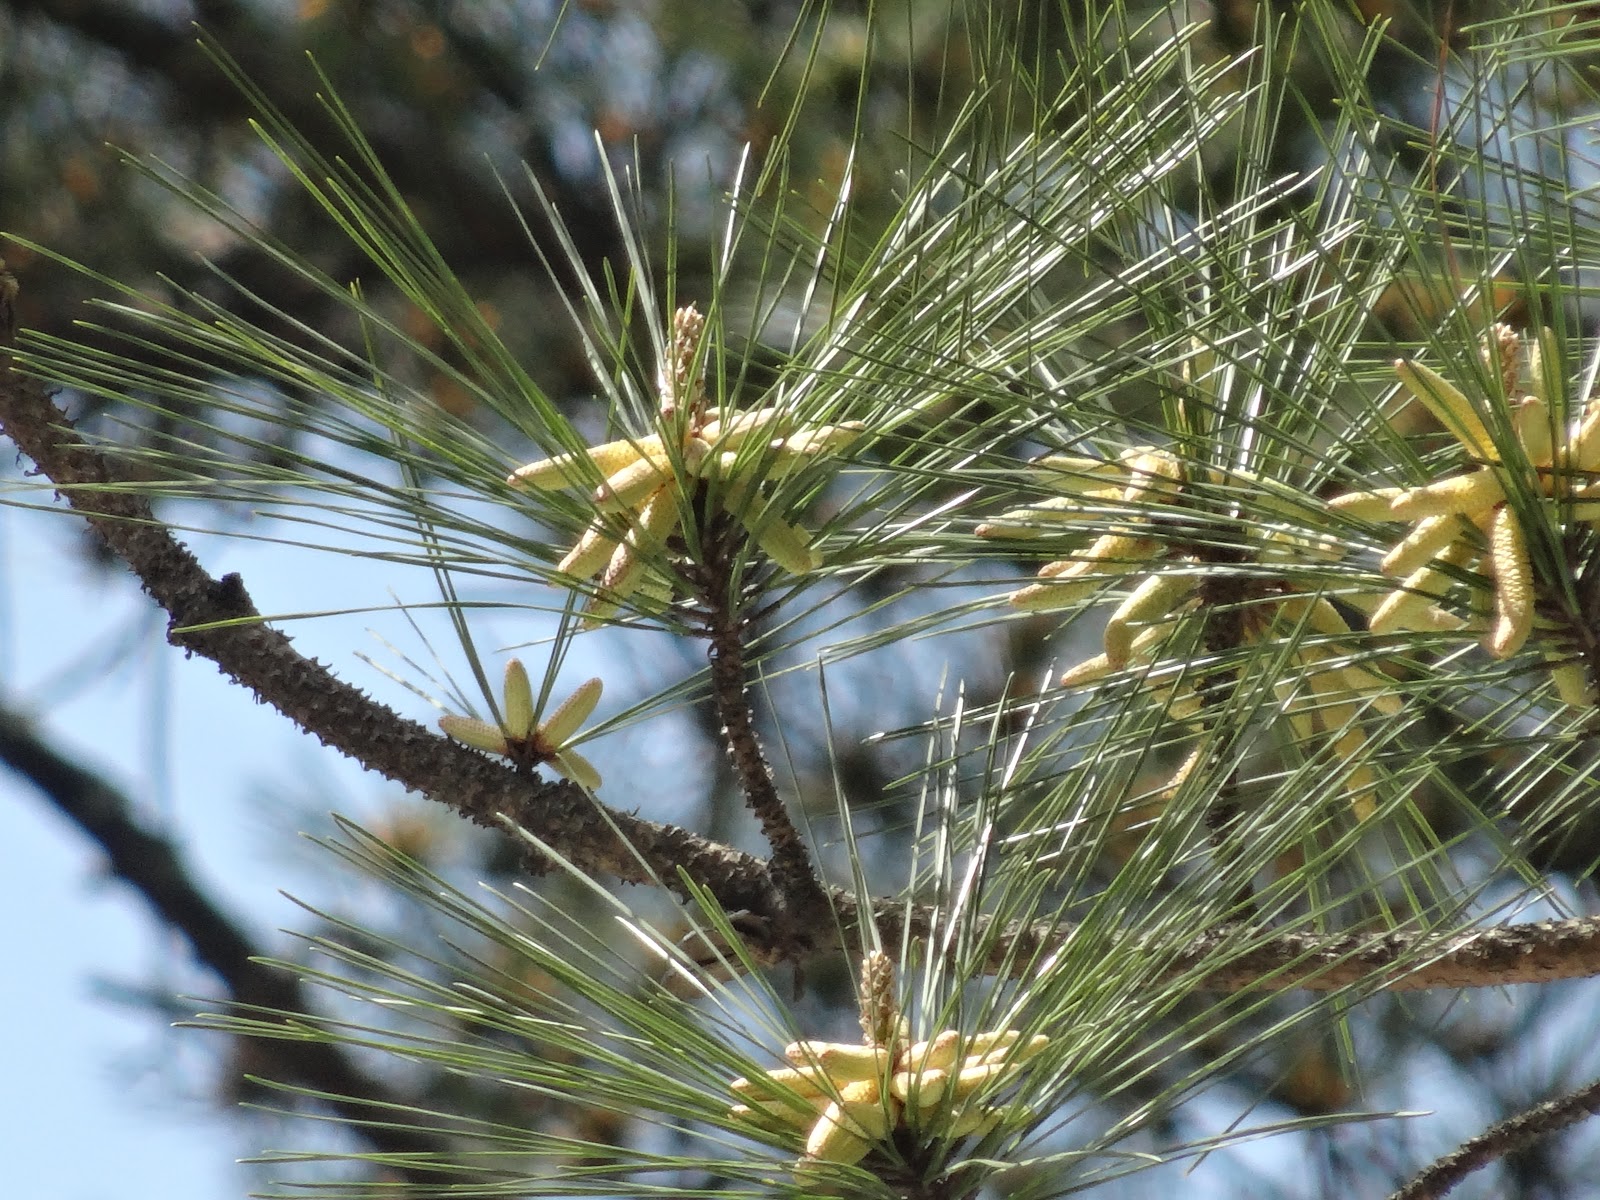 Notes From the Buffer Zone: Pine Pollen